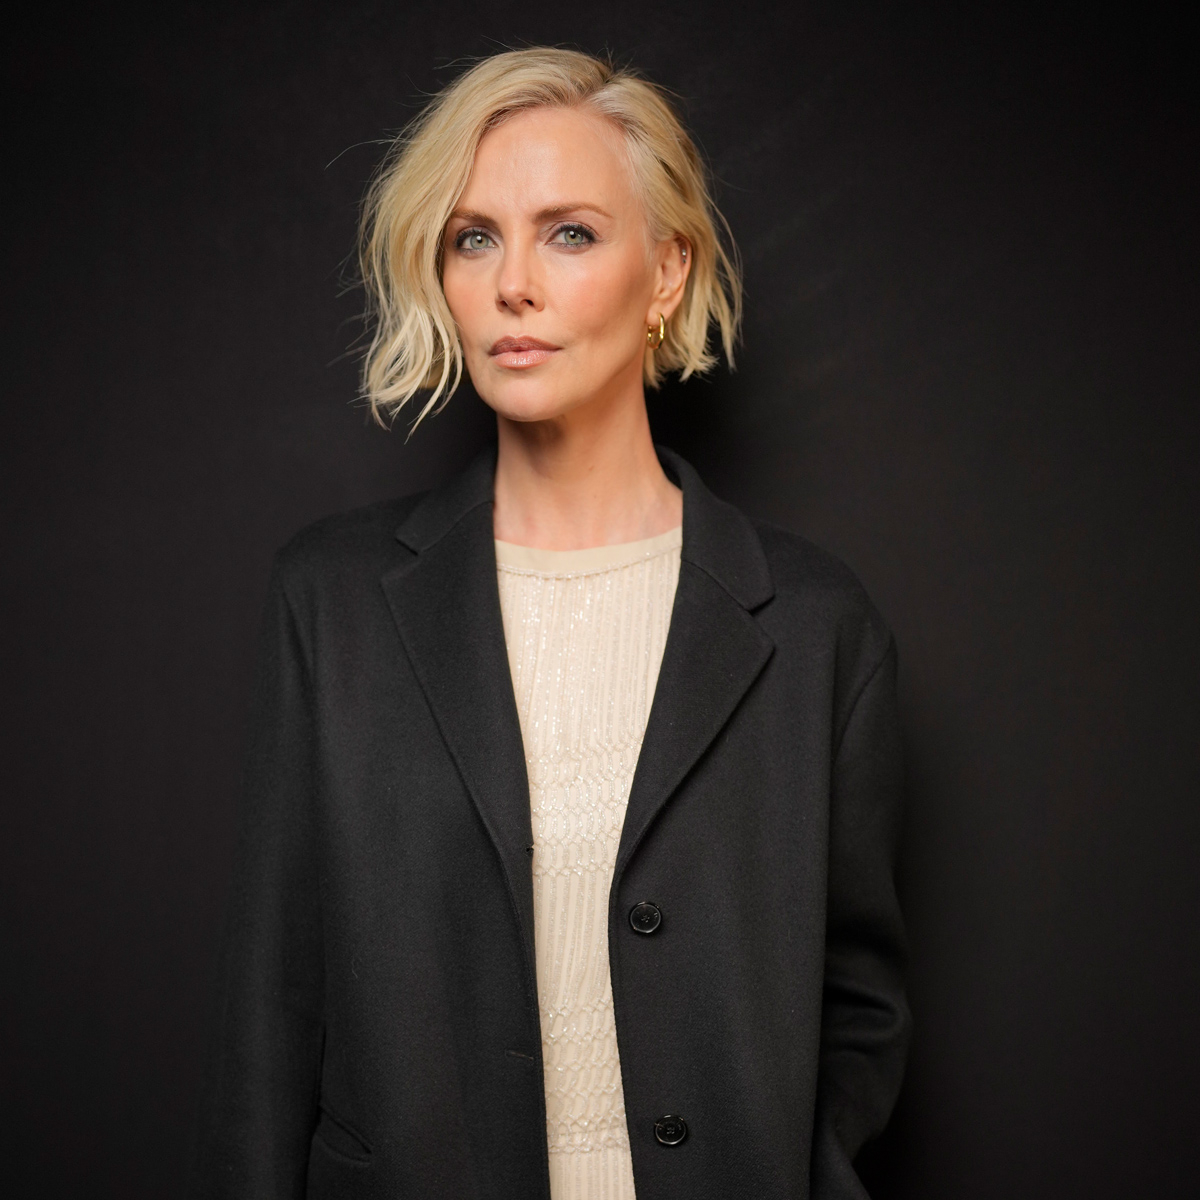 Charlize Theron Reveals She’s “Still Recovering” From This ’90s Trend